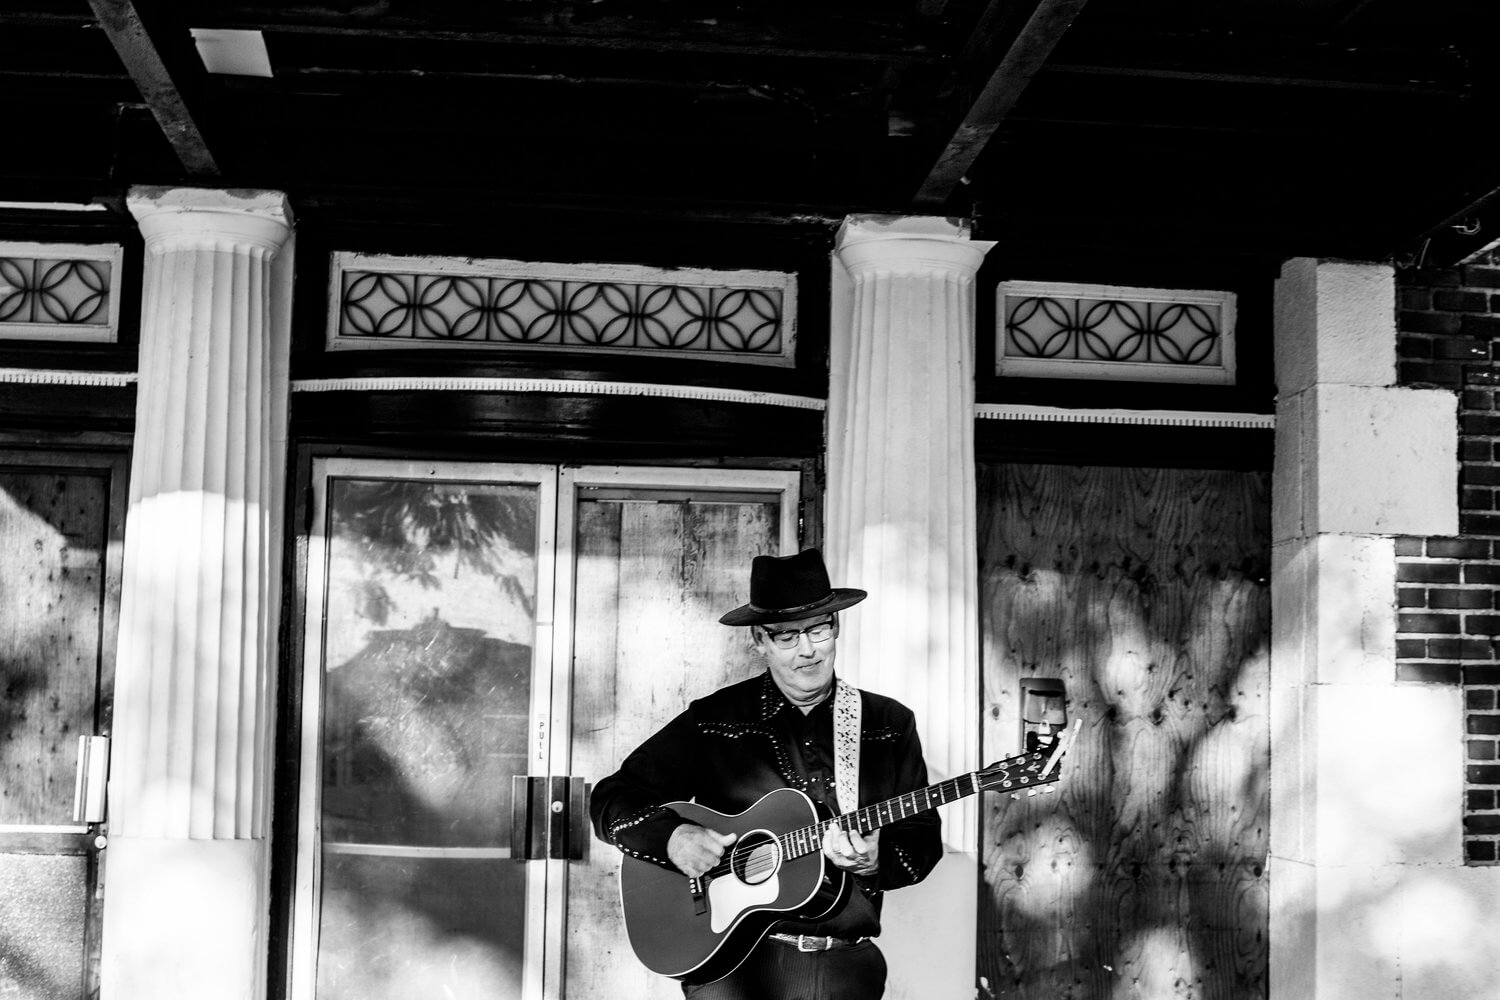 Black and white photo of Fran O'Connell performing as The FrannyO Show on the streets, outside a store, with a guitar around him and a hat. It looks like he's busking.